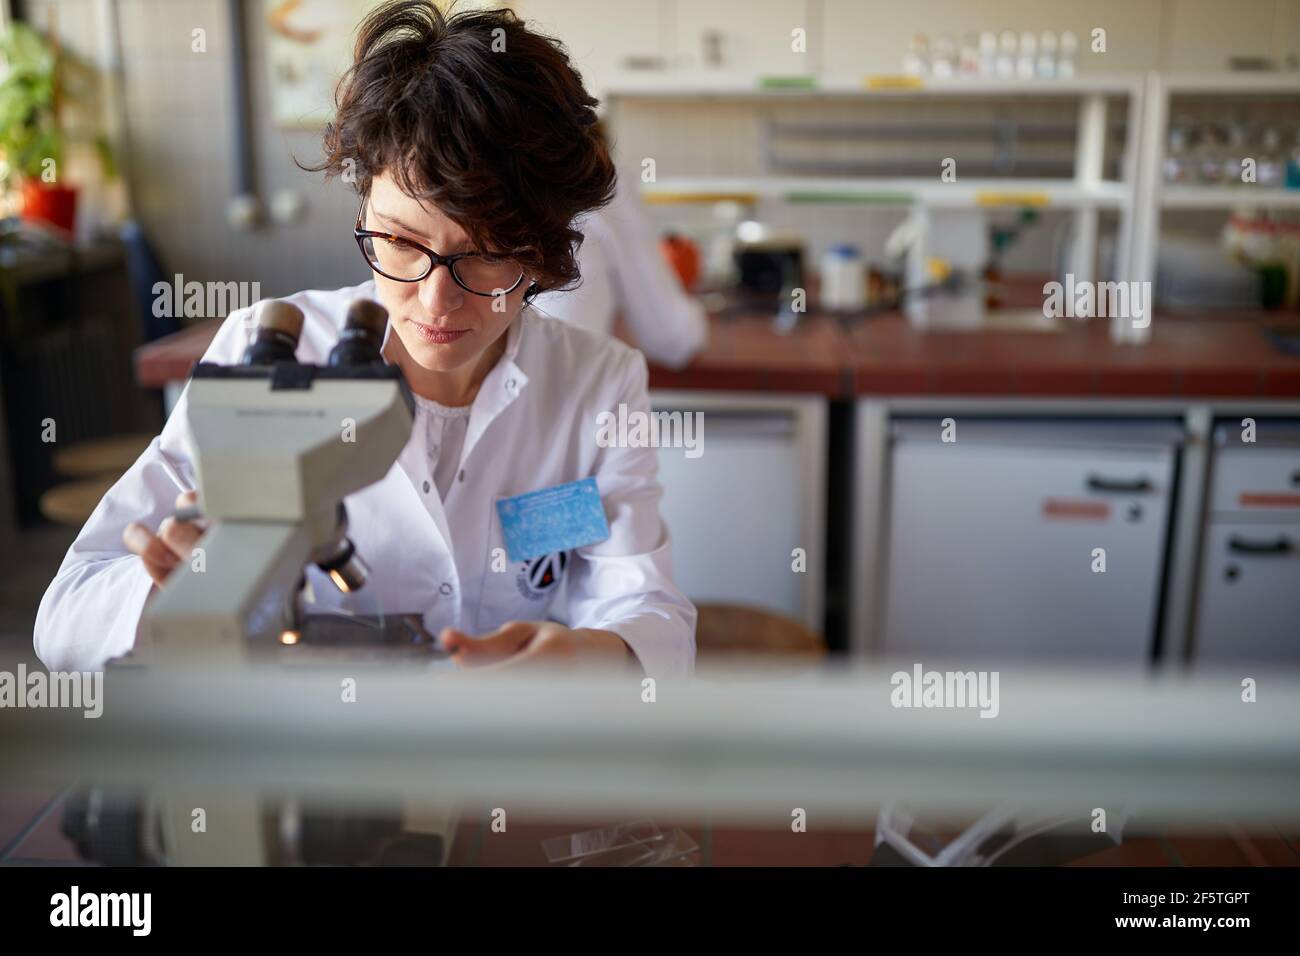 A young female scientist uses the microscope in a working atmosphere in the university laboratory. Science, chemistry, lab, people Stock Photo